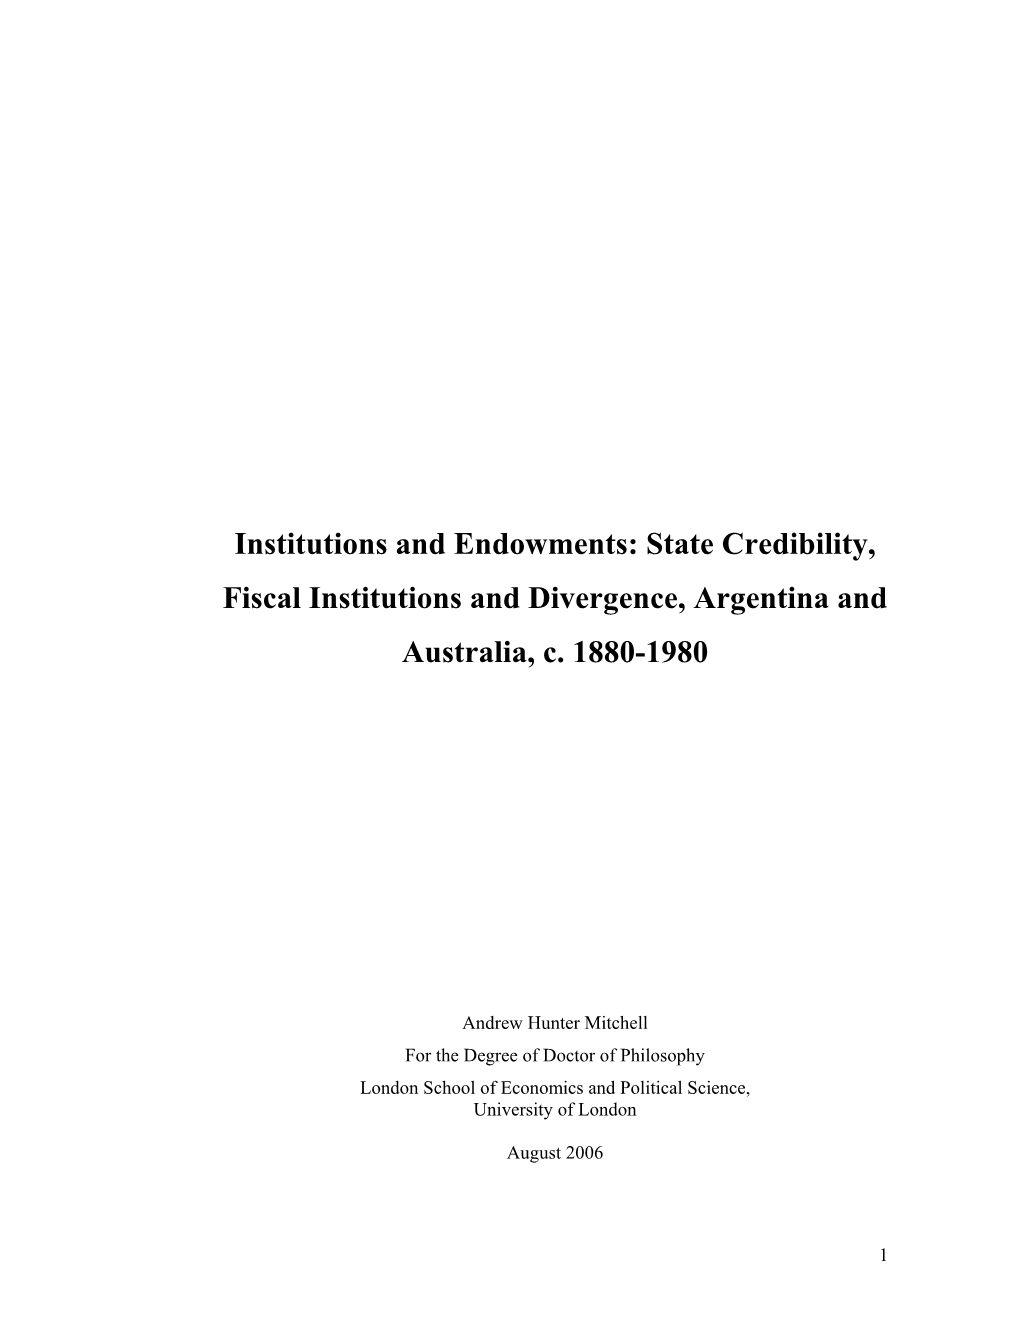 Institutions and Endowments: State Credibility, Fiscal Institutions and Divergence, Argentina and Australia, C